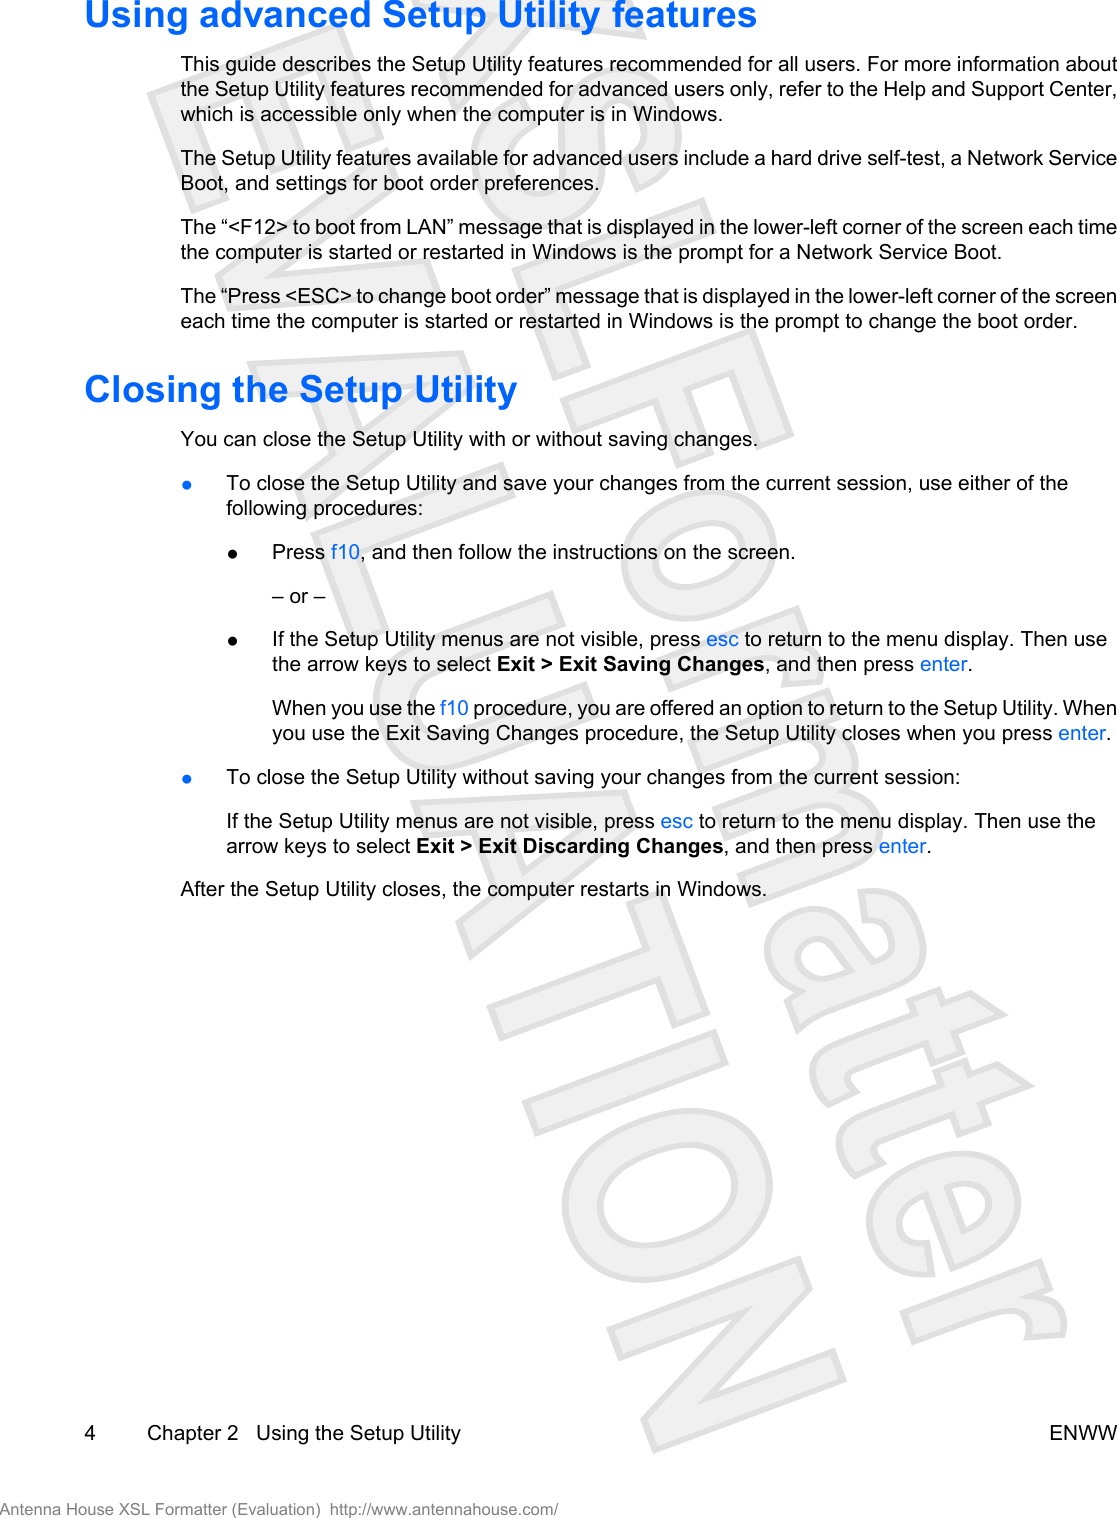 Using advanced Setup Utility featuresThis guide describes the Setup Utility features recommended for all users. For more information aboutthe Setup Utility features recommended for advanced users only, refer to the Help and Support Center,which is accessible only when the computer is in Windows.The Setup Utility features available for advanced users include a hard drive self-test, a Network ServiceBoot, and settings for boot order preferences.The “&lt;F12&gt; to boot from LAN” message that is displayed in the lower-left corner of the screen each timethe computer is started or restarted in Windows is the prompt for a Network Service Boot.The “Press &lt;ESC&gt; to change boot order” message that is displayed in the lower-left corner of the screeneach time the computer is started or restarted in Windows is the prompt to change the boot order.Closing the Setup UtilityYou can close the Setup Utility with or without saving changes.●To close the Setup Utility and save your changes from the current session, use either of thefollowing procedures:●Press f10, and then follow the instructions on the screen.– or –●If the Setup Utility menus are not visible, press esc to return to the menu display. Then usethe arrow keys to select Exit &gt; Exit Saving Changes, and then press enter.When you use the f10 procedure, you are offered an option to return to the Setup Utility. Whenyou use the Exit Saving Changes procedure, the Setup Utility closes when you press enter.●To close the Setup Utility without saving your changes from the current session:If the Setup Utility menus are not visible, press esc to return to the menu display. Then use thearrow keys to select Exit &gt; Exit Discarding Changes, and then press enter.After the Setup Utility closes, the computer restarts in Windows.4 Chapter 2   Using the Setup Utility ENWWAntenna House XSL Formatter (Evaluation)  http://www.antennahouse.com/